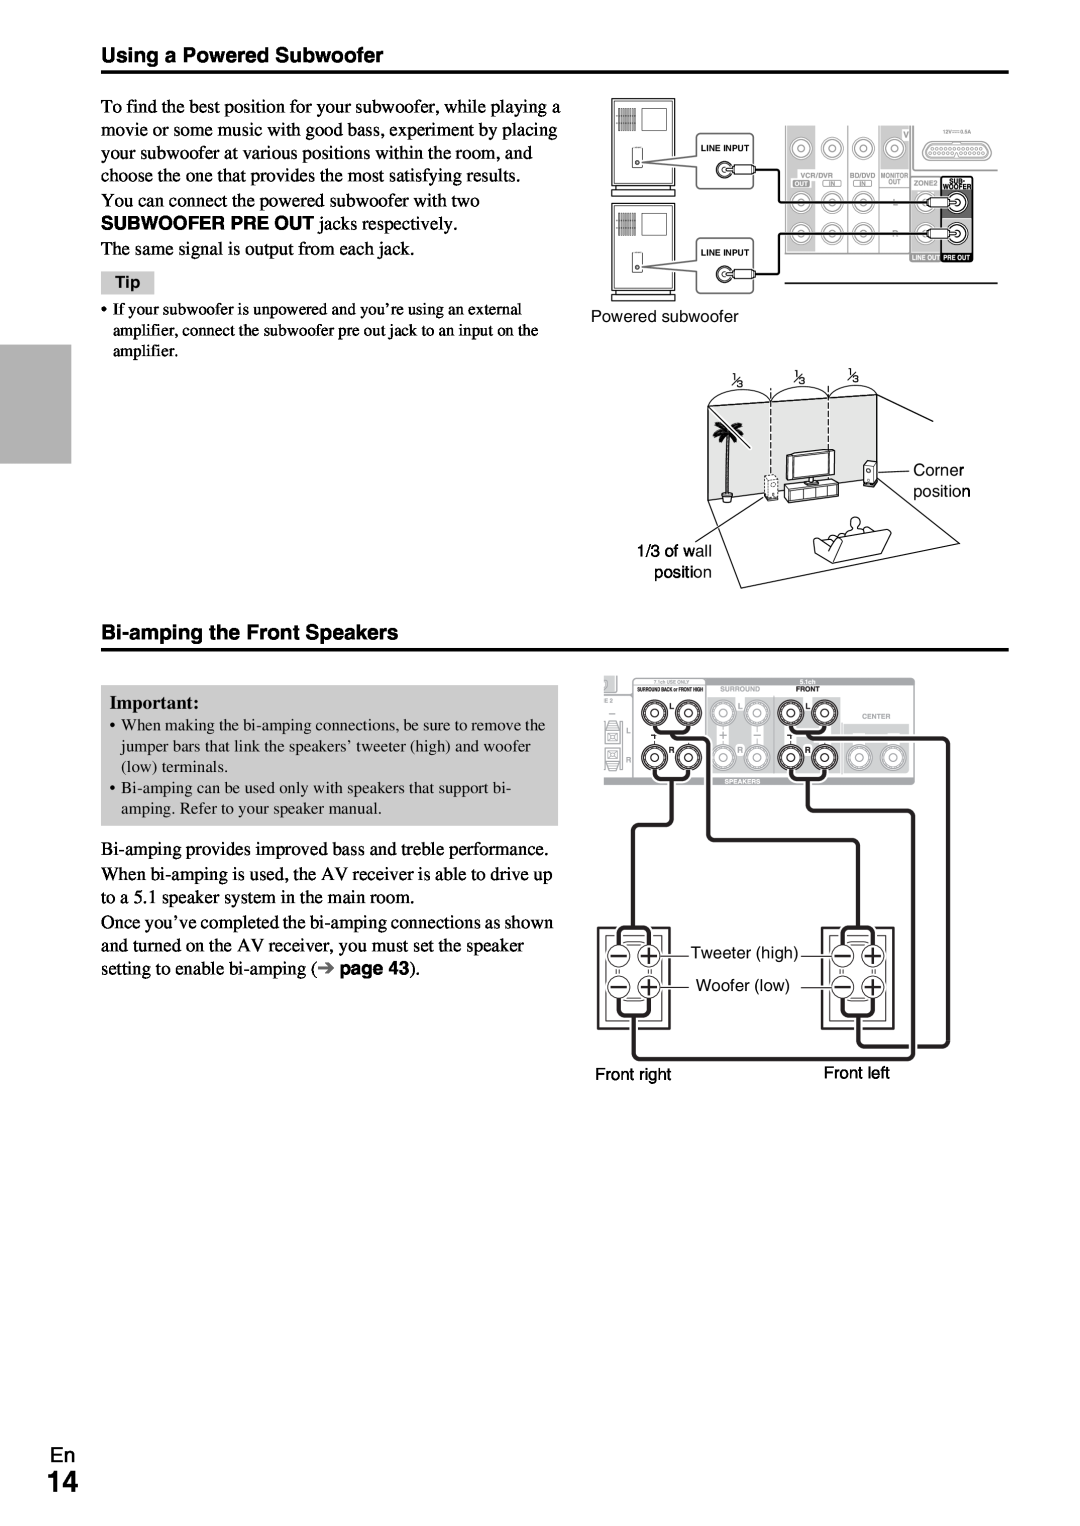 Onkyo HT-RC360 instruction manual Using a Powered Subwoofer, Bi-ampingthe Front Speakers 